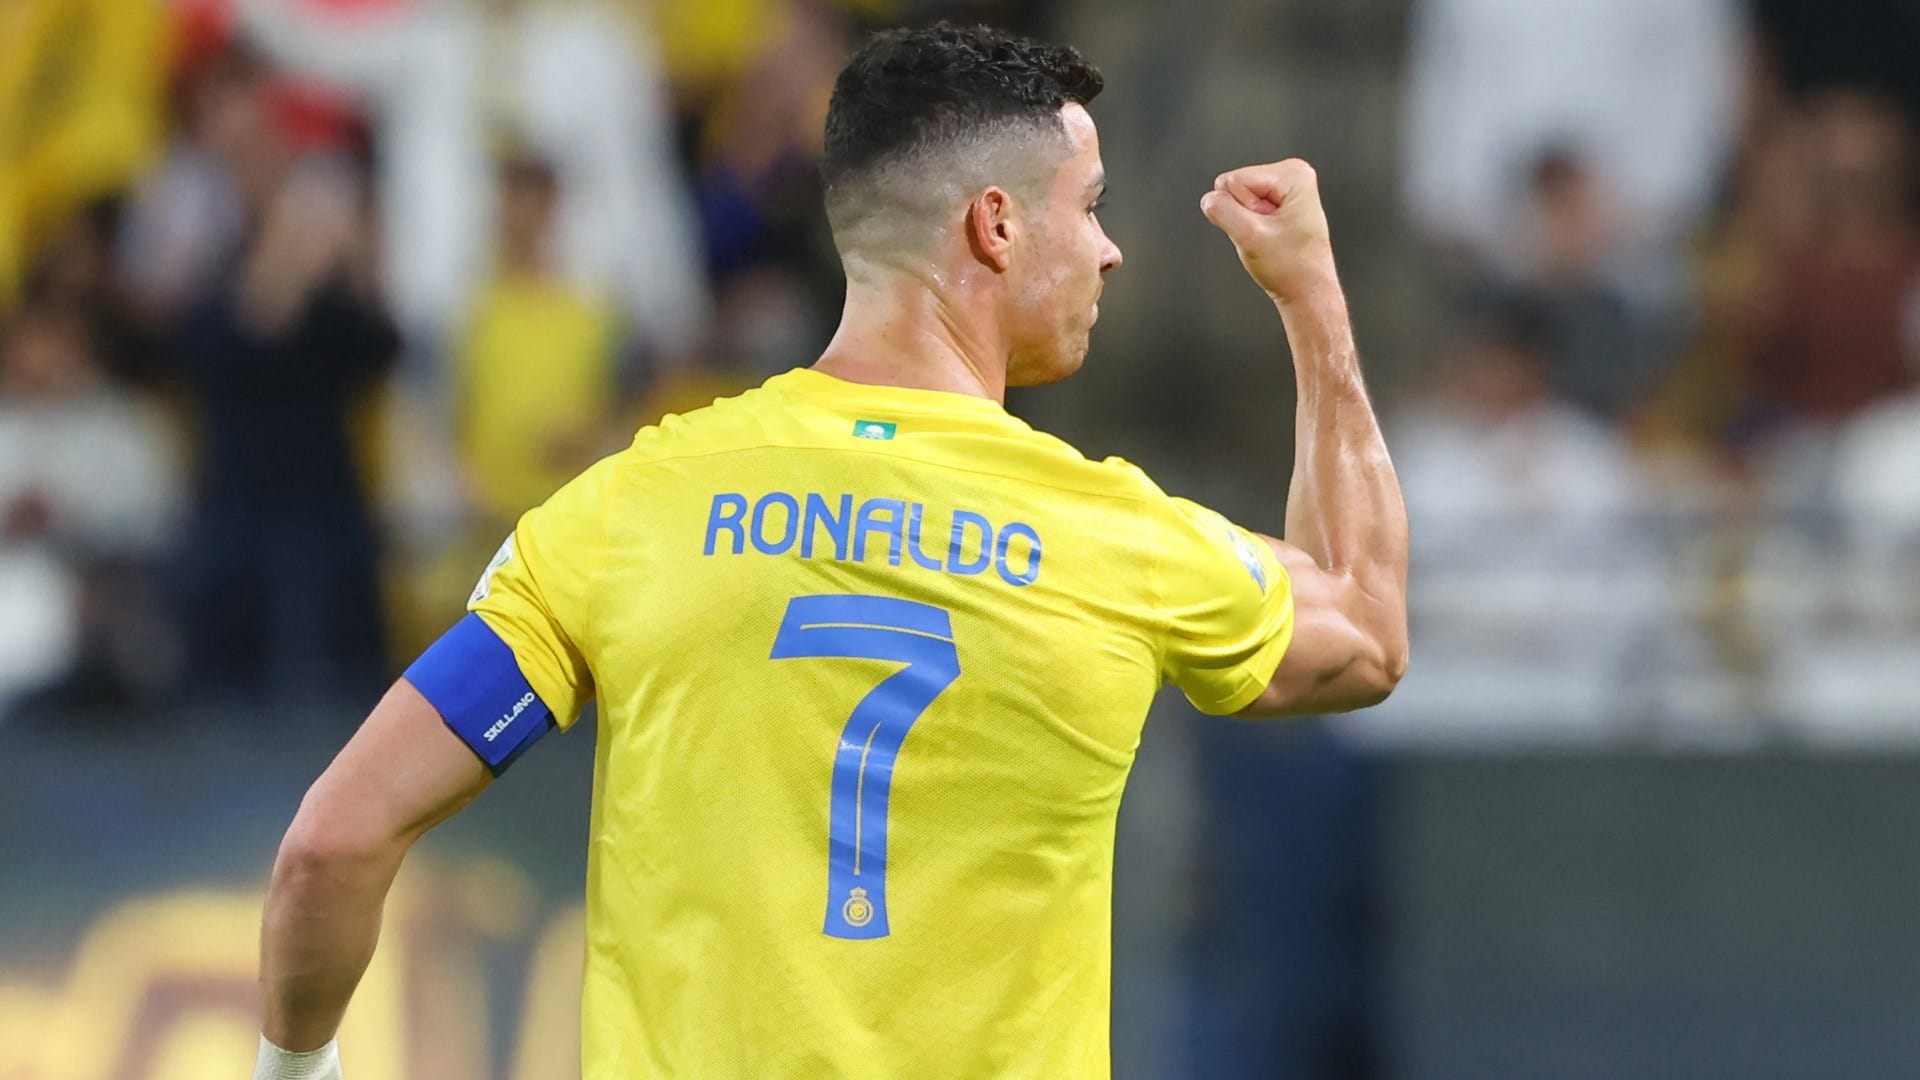 Exactly 20 Years After Champions League Debut, Cristiano Ronaldo Eyes 2nd  Consecutive Award With Al Nassr - EssentiallySports